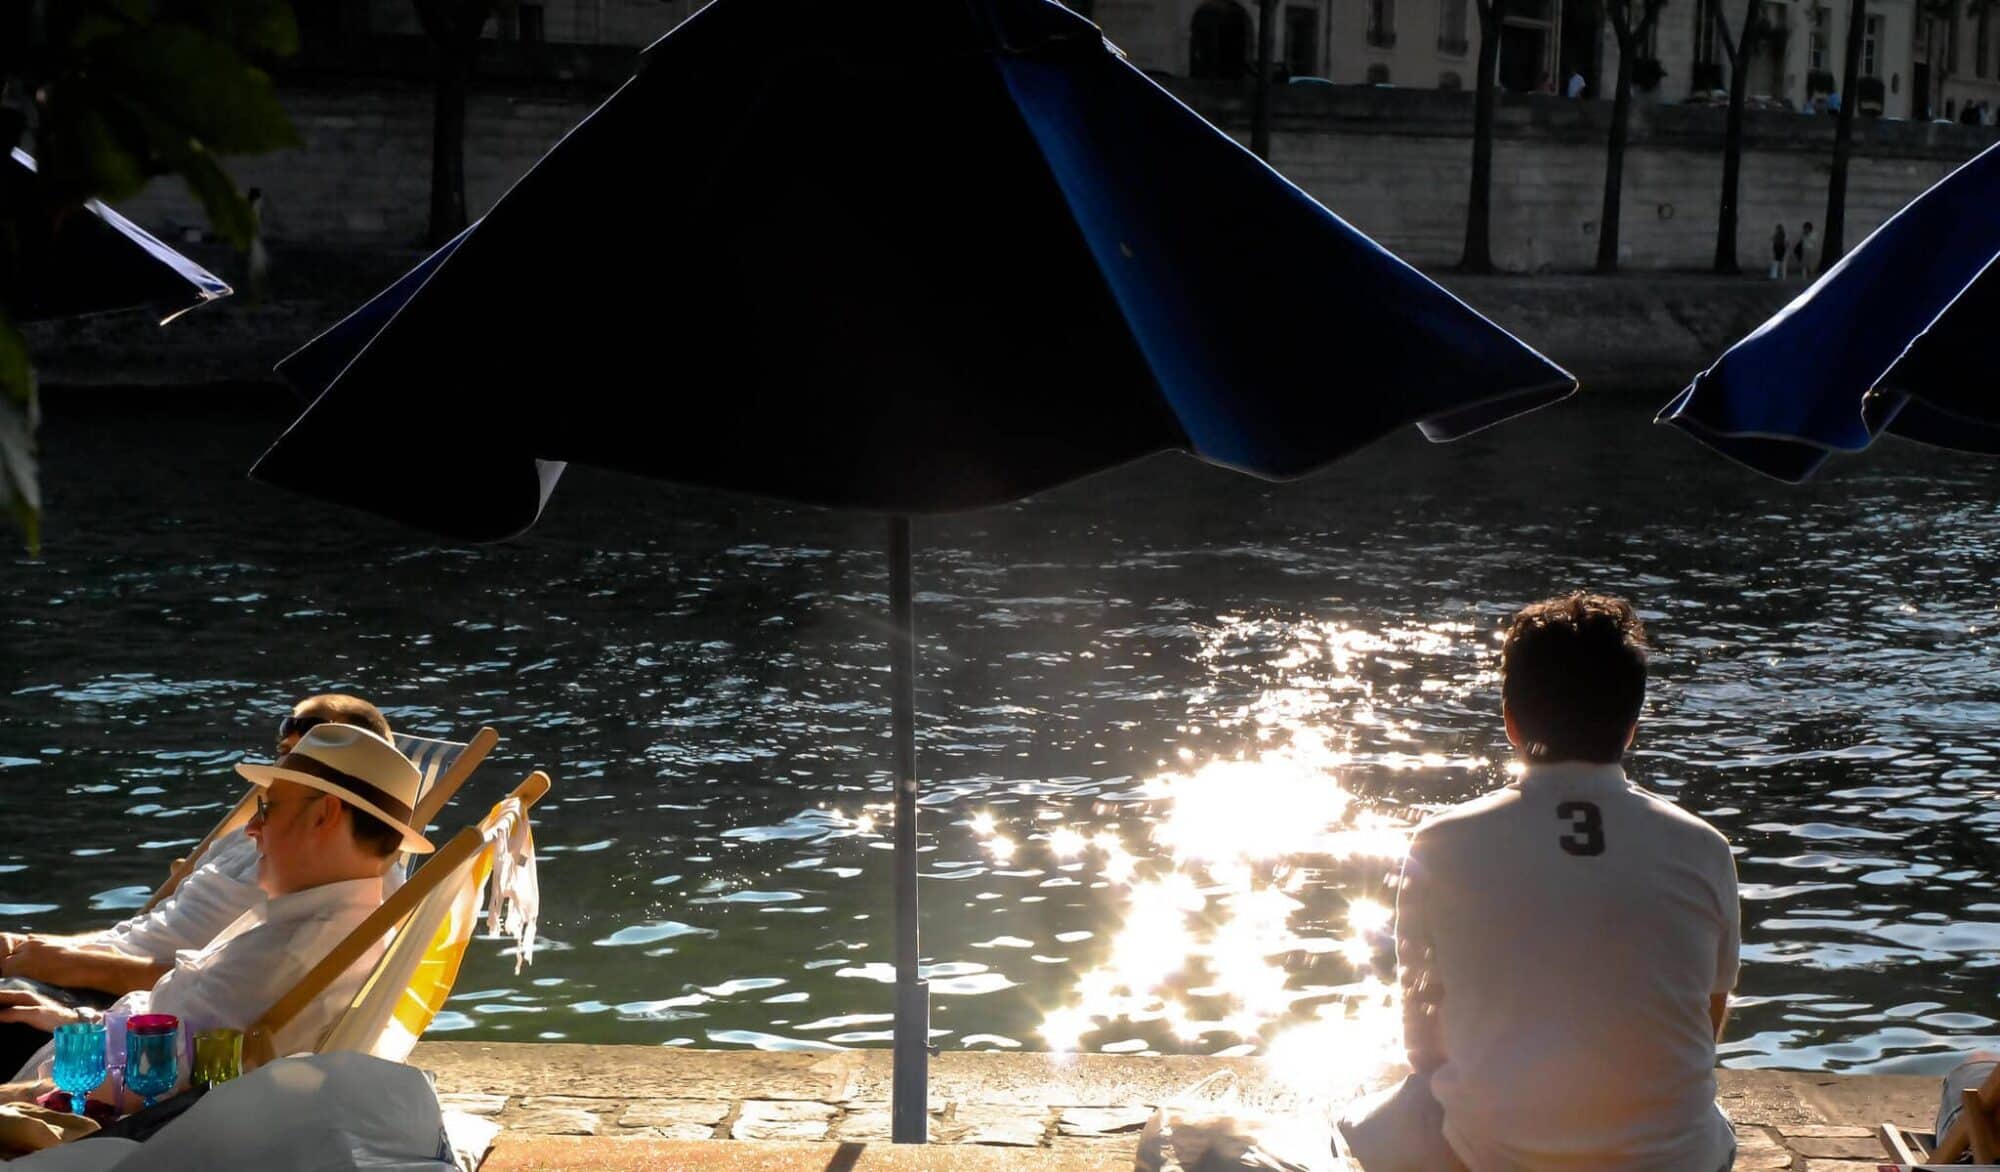 A man looks at the Seine river at sunset while sitting on the banks of the river with a person relaxing on a sun lounger to his left, with a blue umbrella in between.